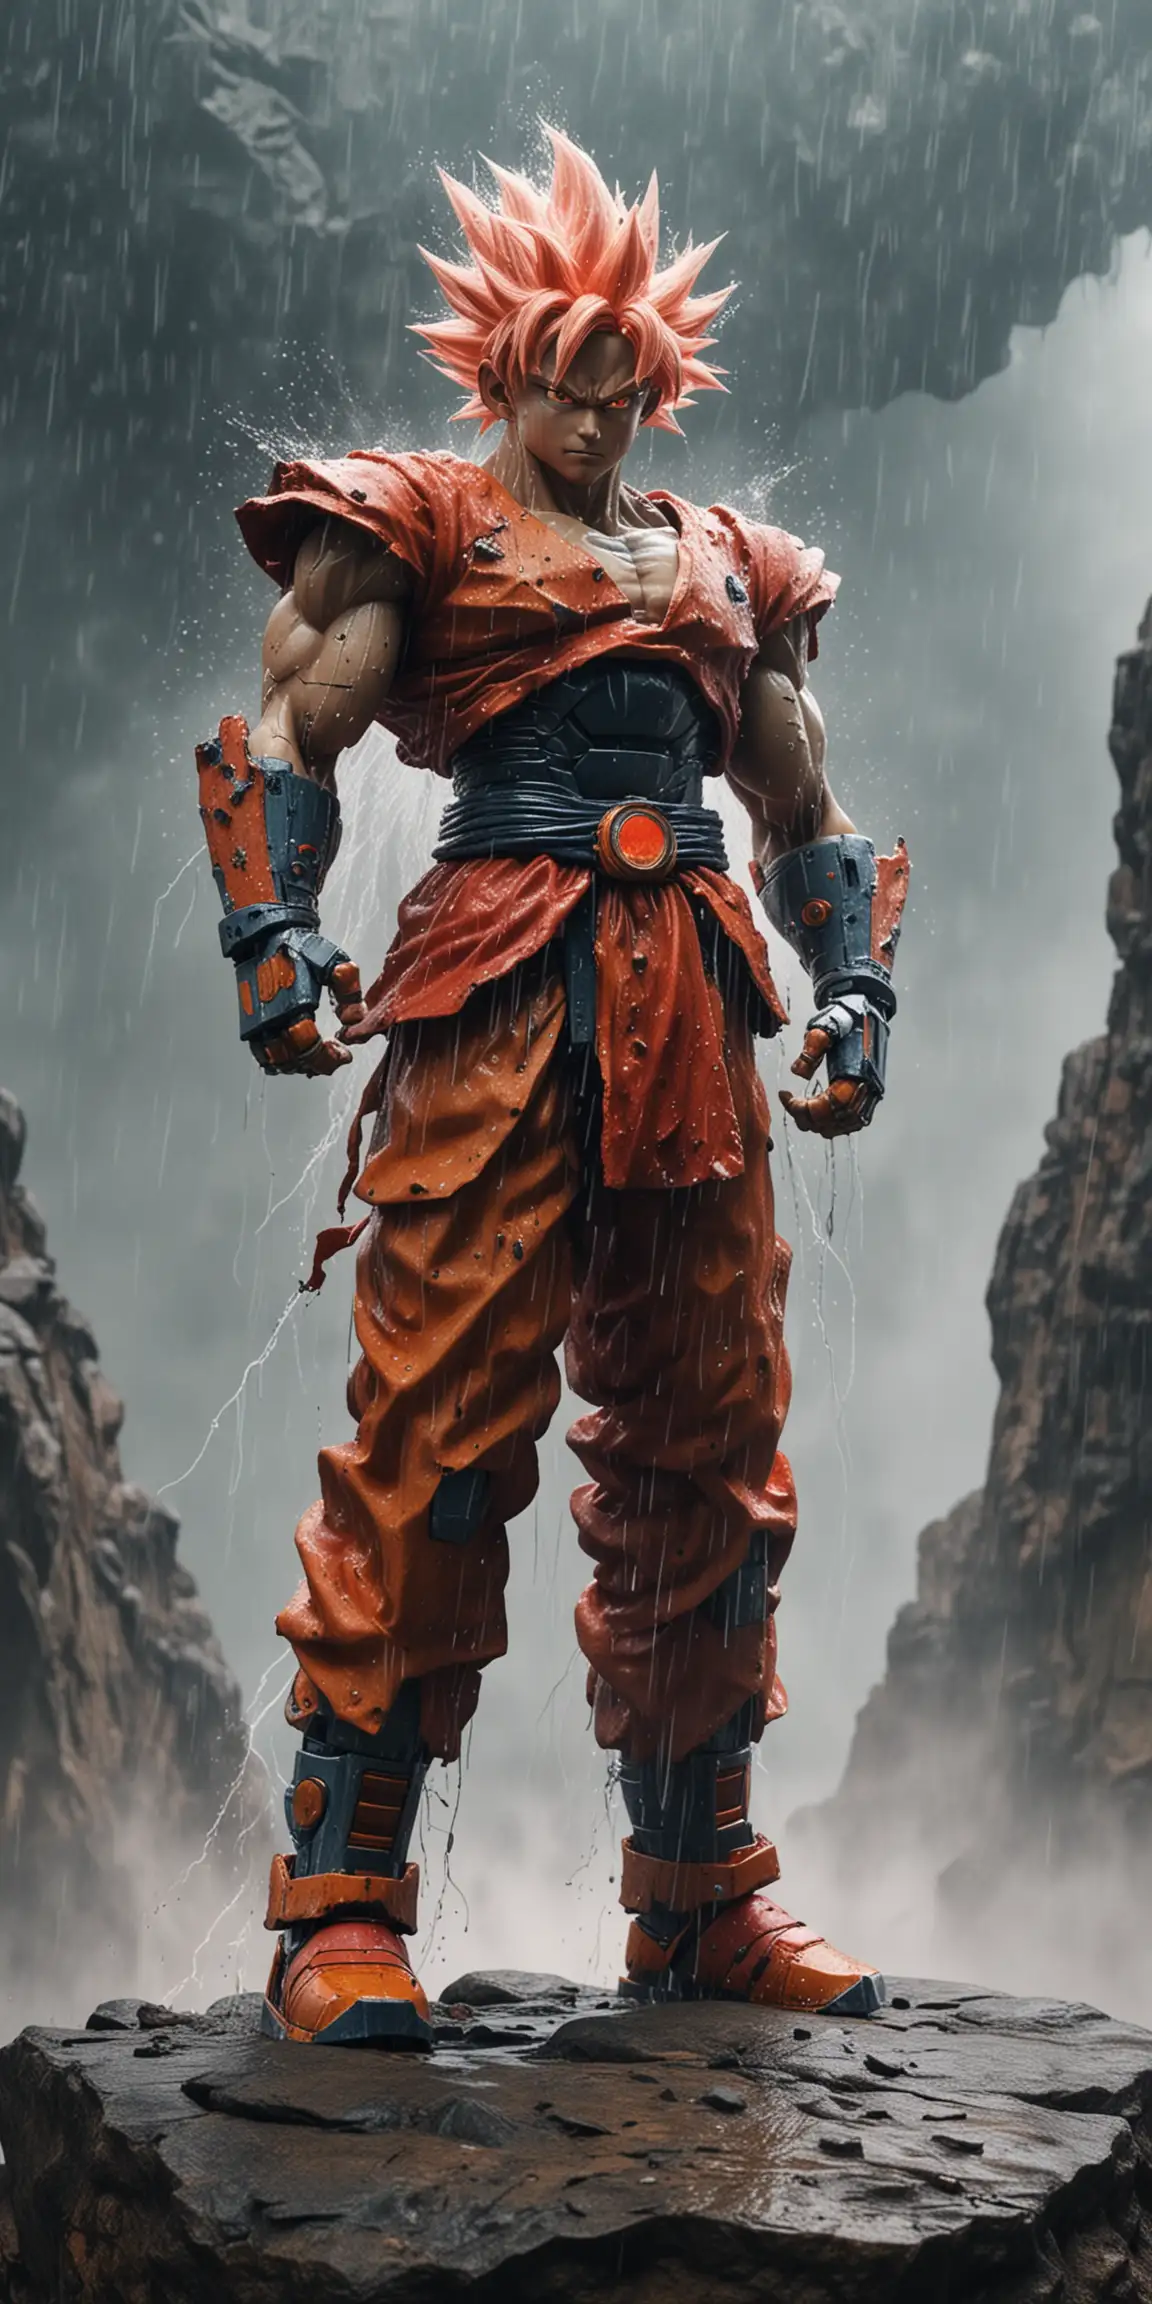 Robot Goku Standing on Big Rock in Red Clouds with Lightning and Rain